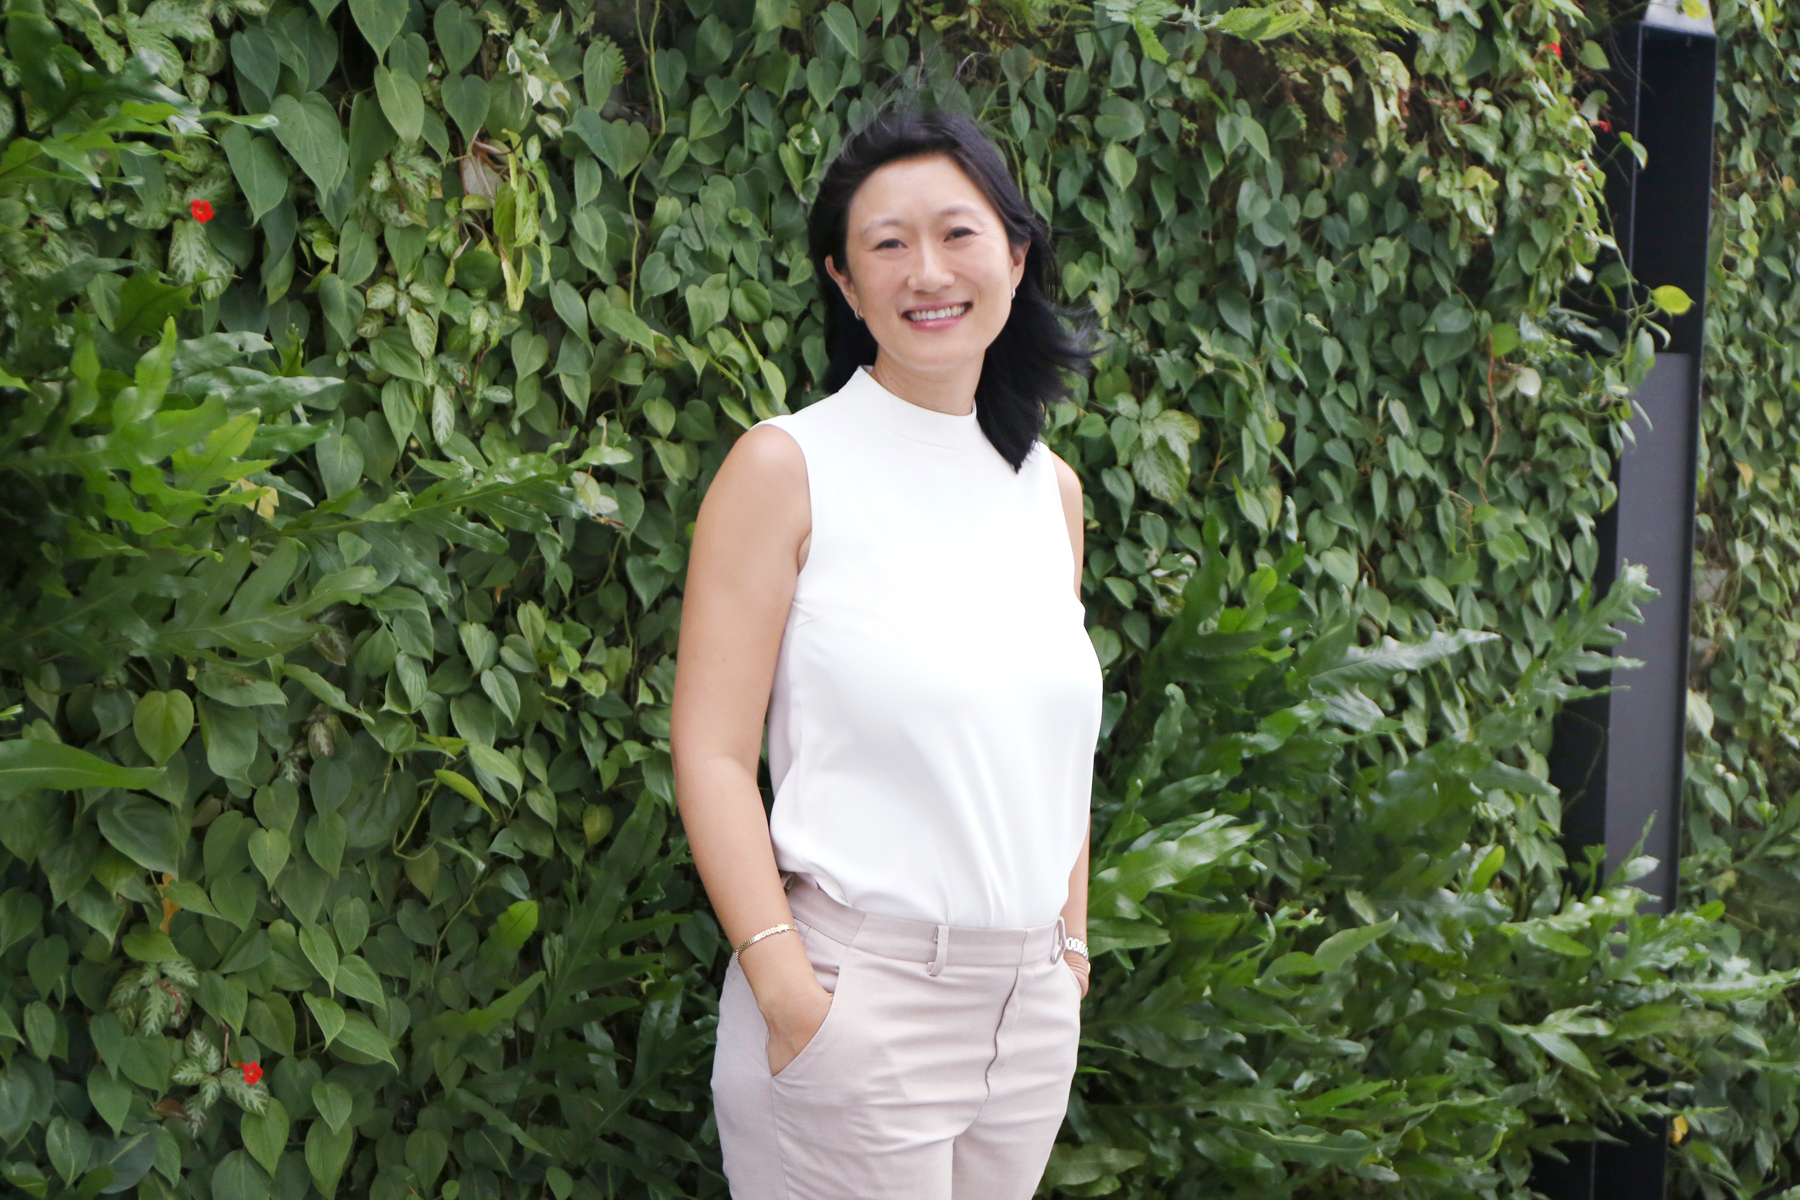 [Tuning In] Patti Chu wants to help startups make a positive social impact in Asia